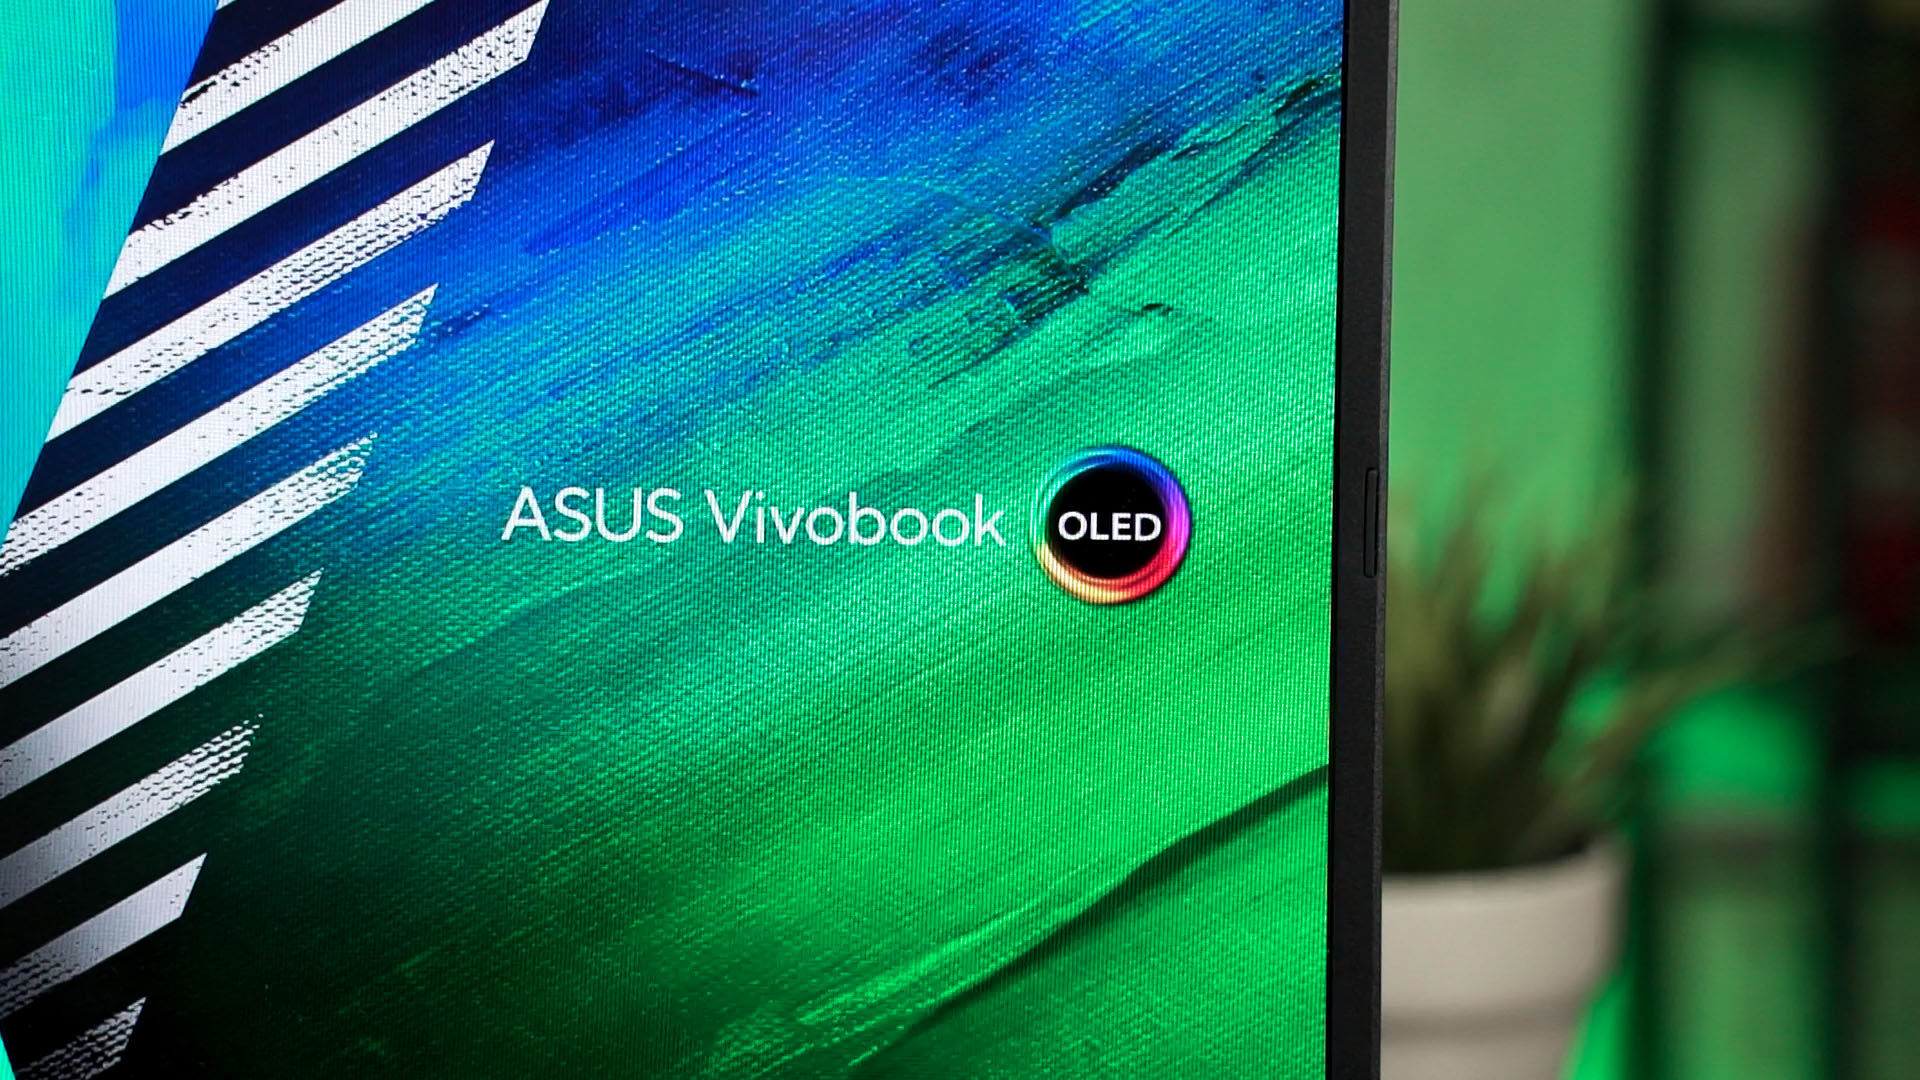 Portable Oled Gaming Is Now Possible With The Asus Vivobook Pro